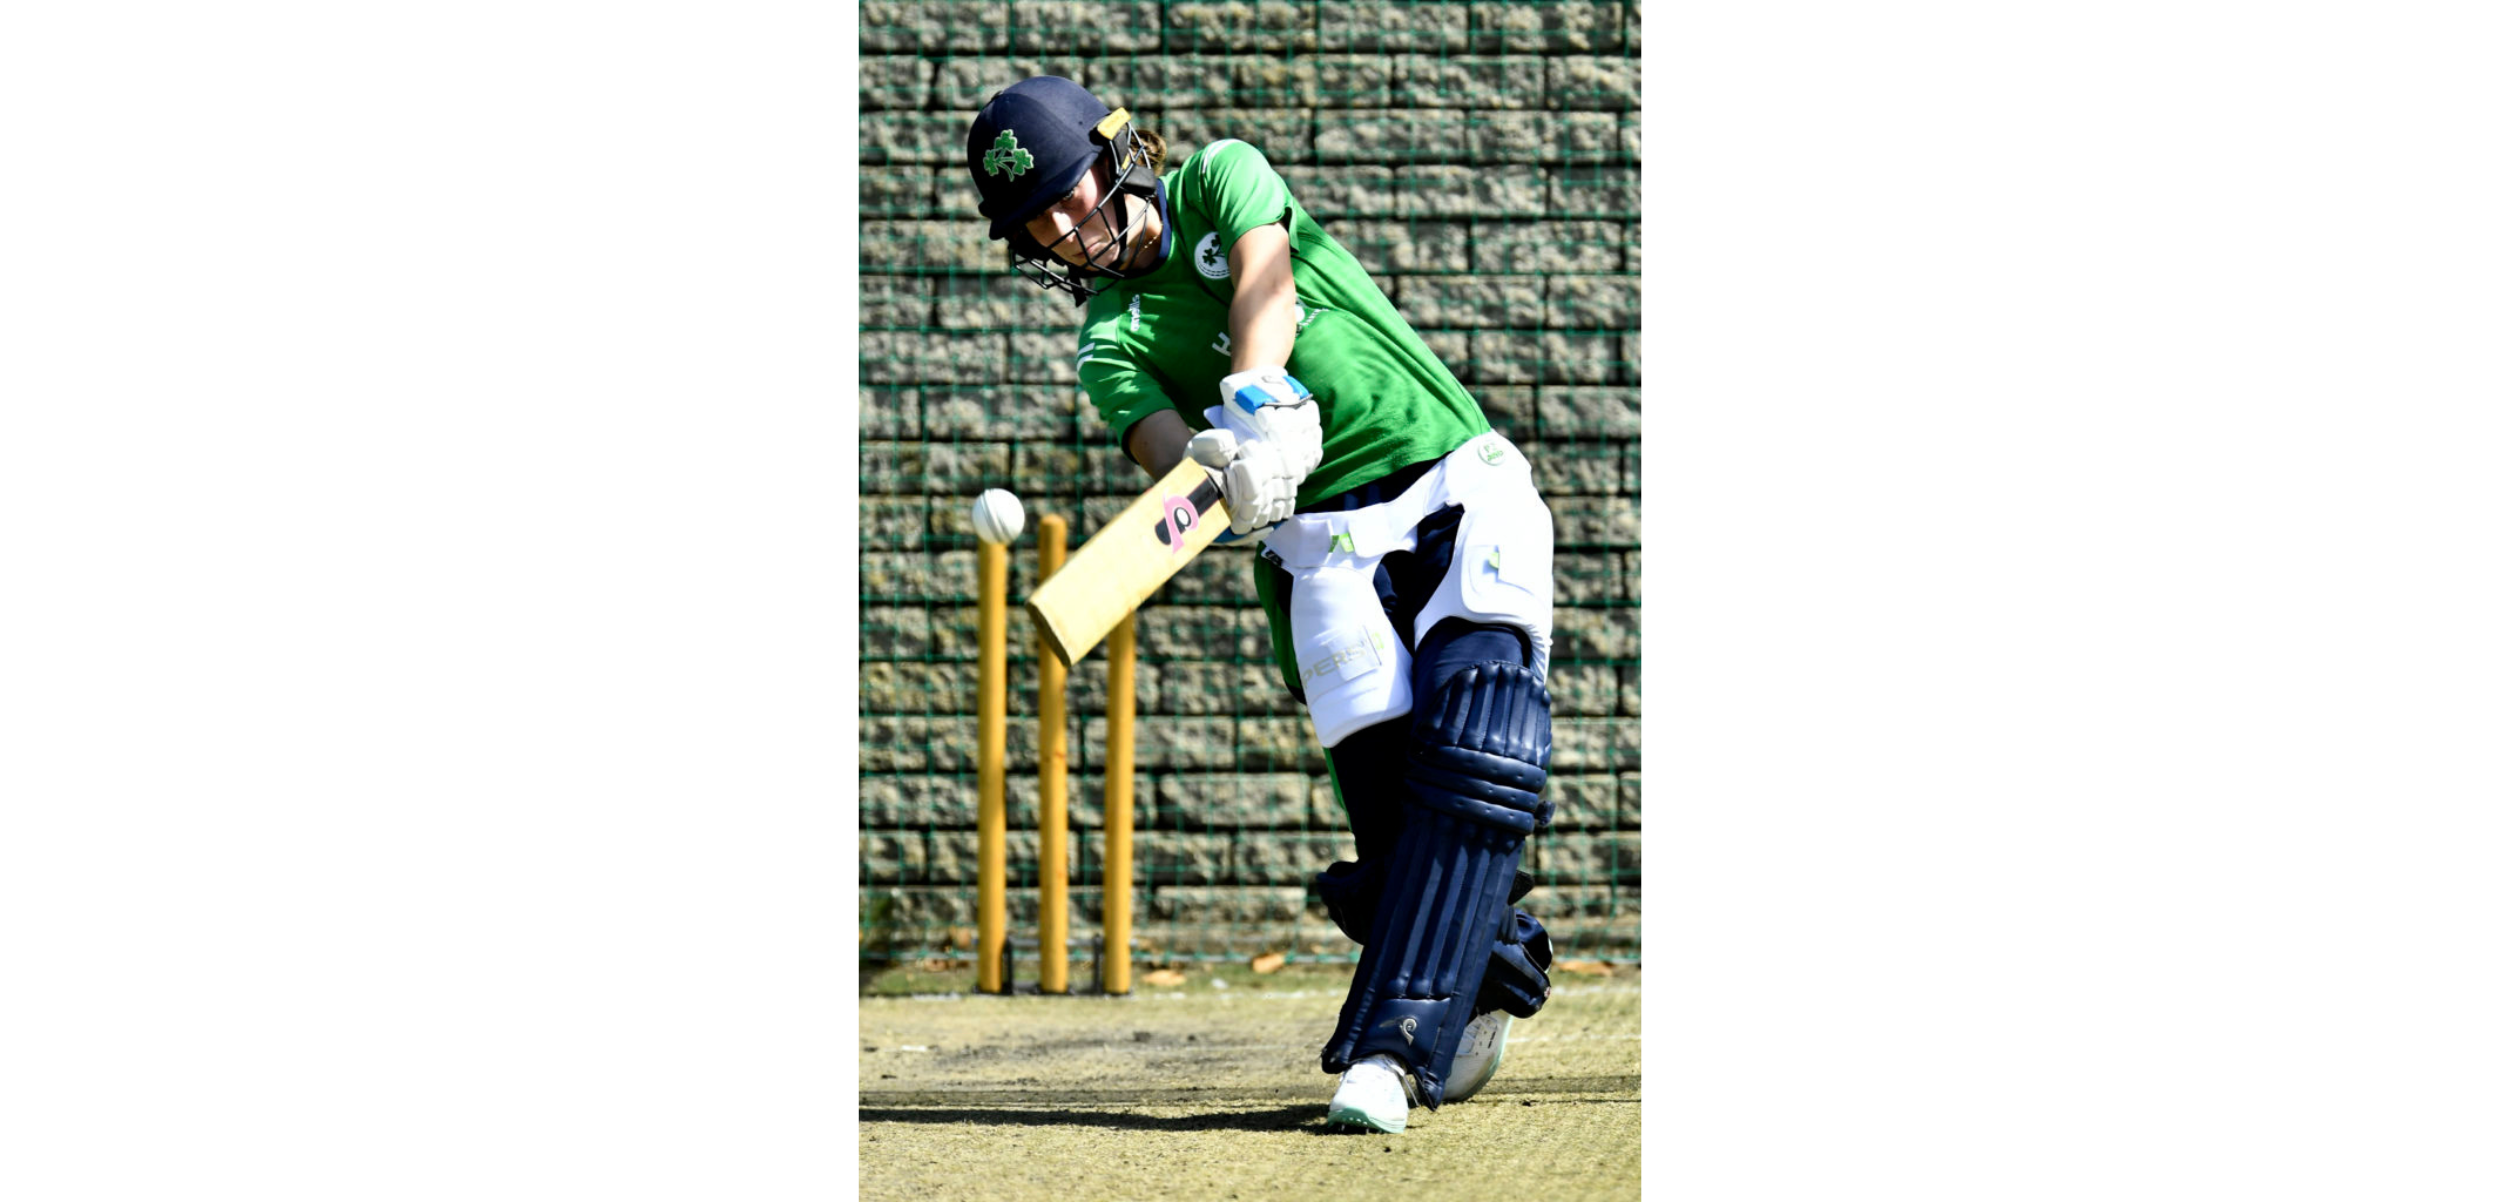 Cricket Ireland: Orla Prendergast - “Our next game is one that we’re definitely targeting to come away with a win”